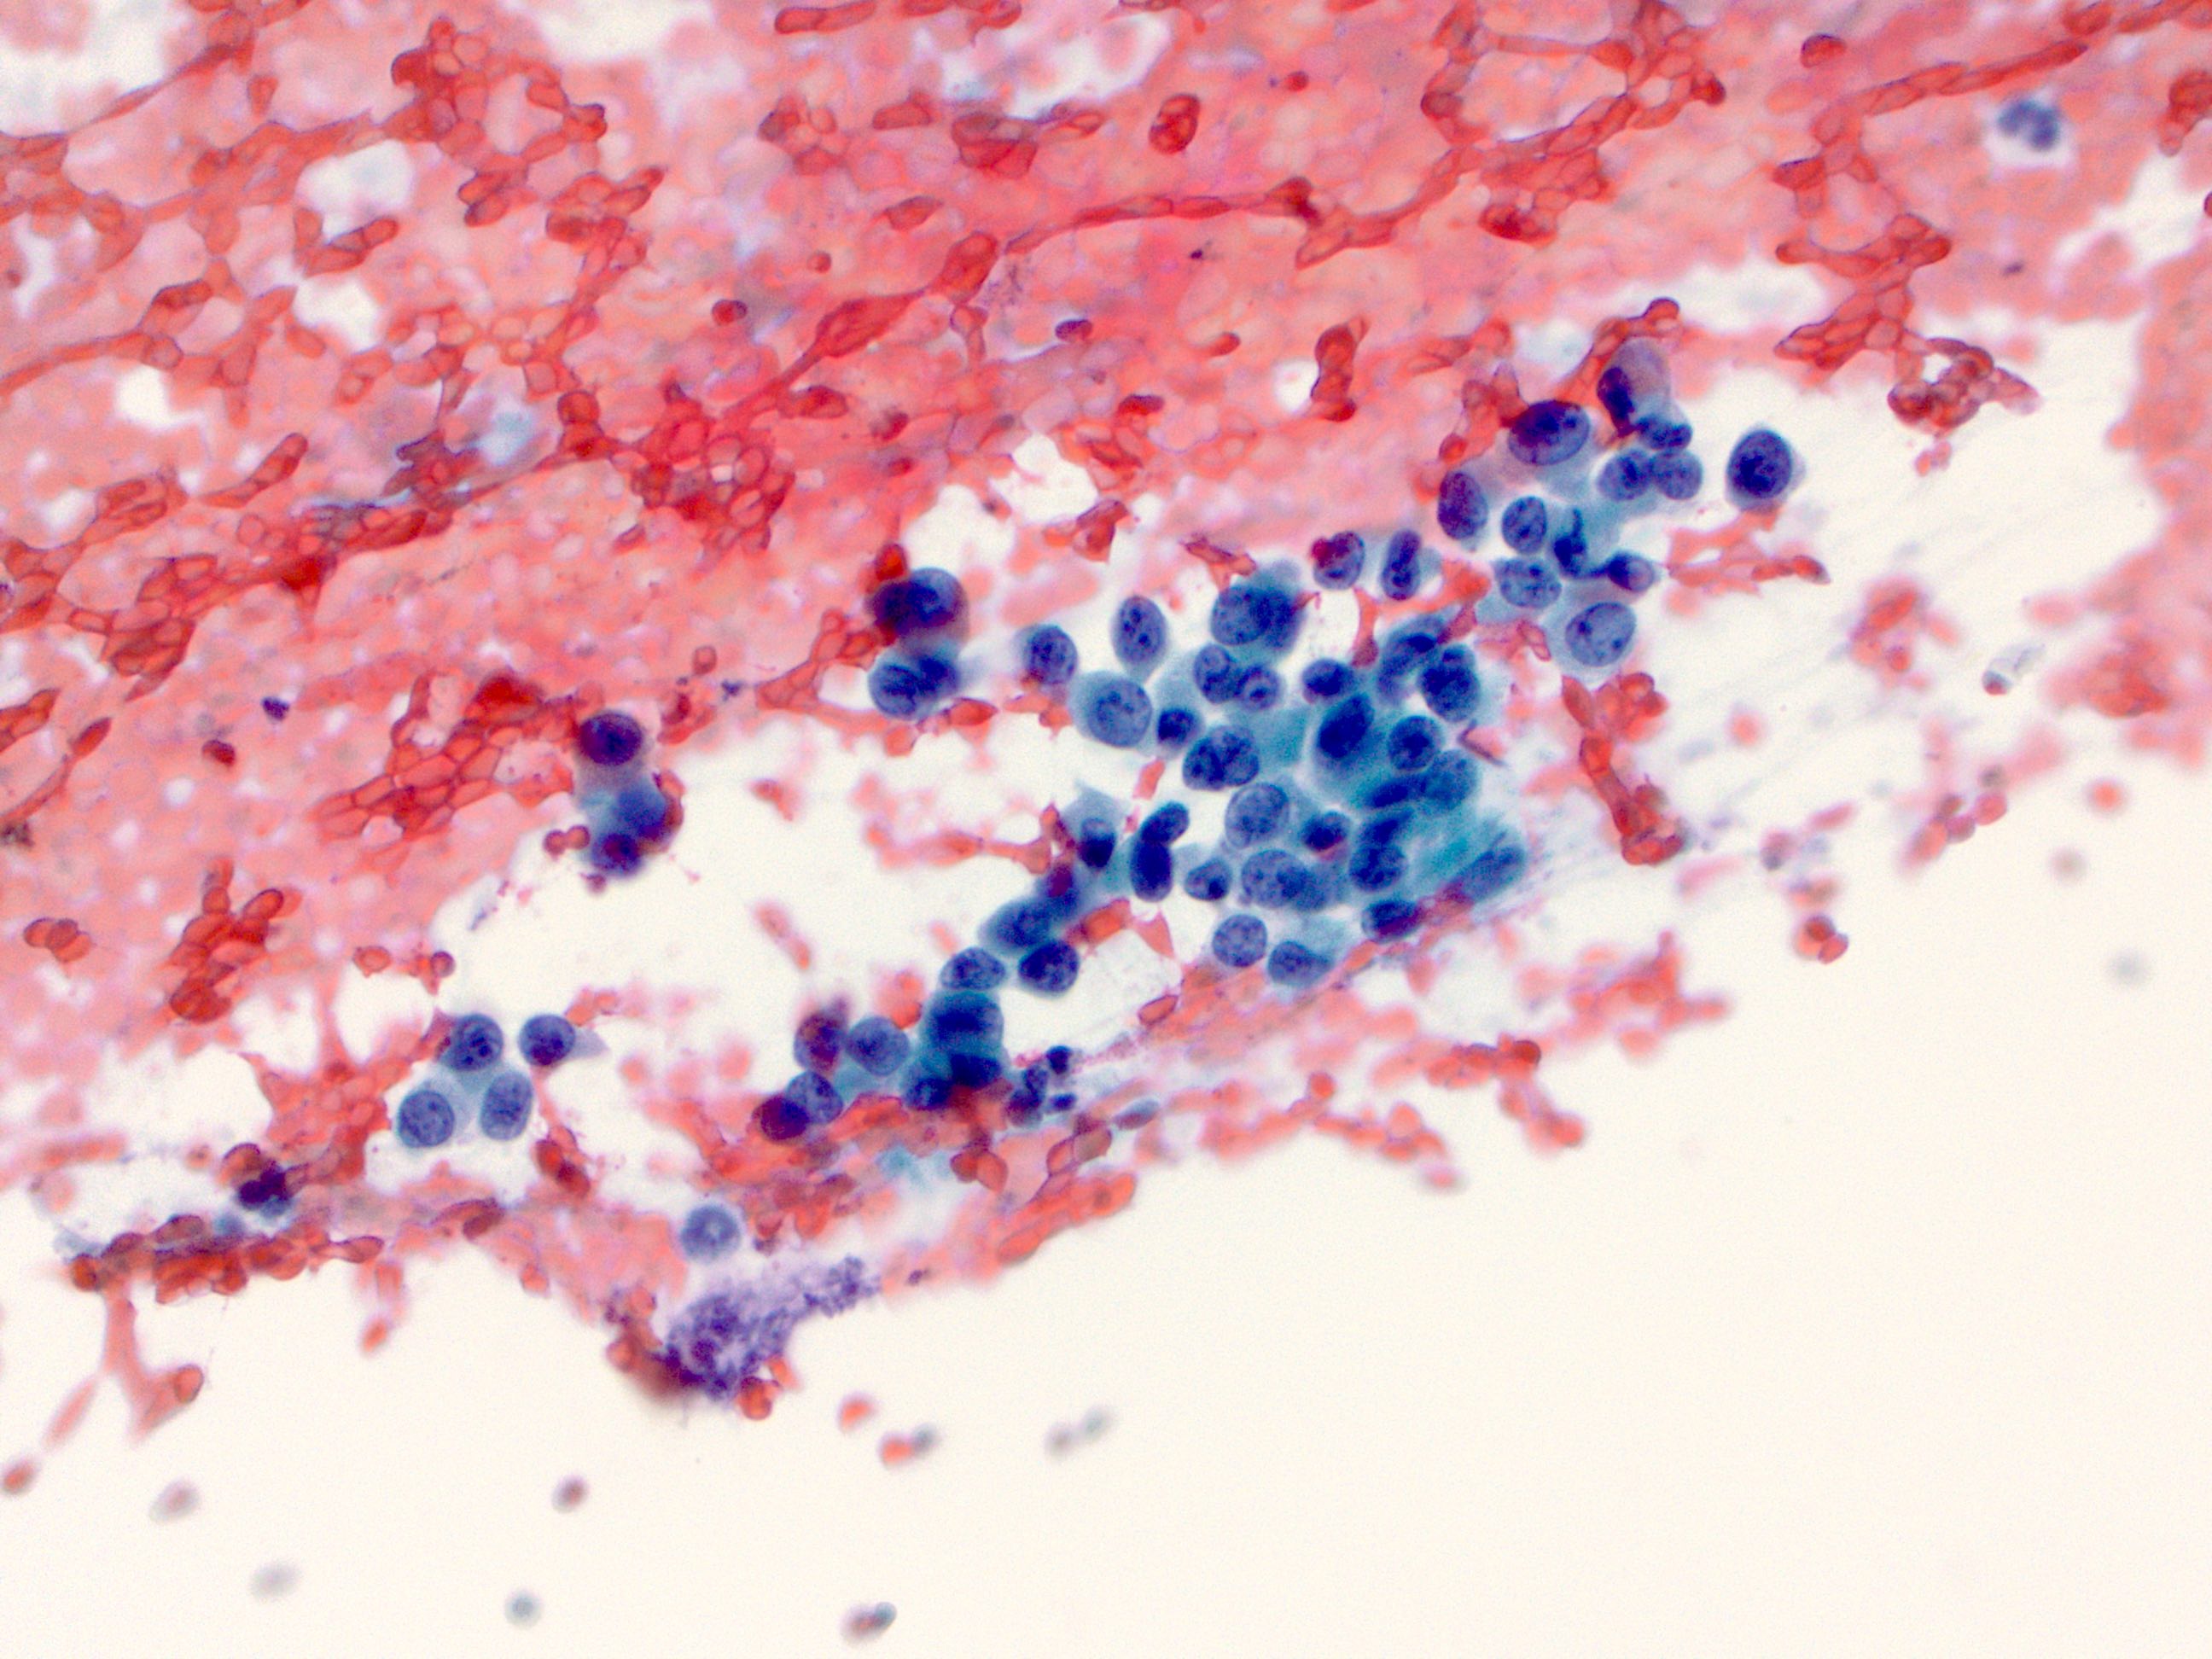 Malignant cells on Pap